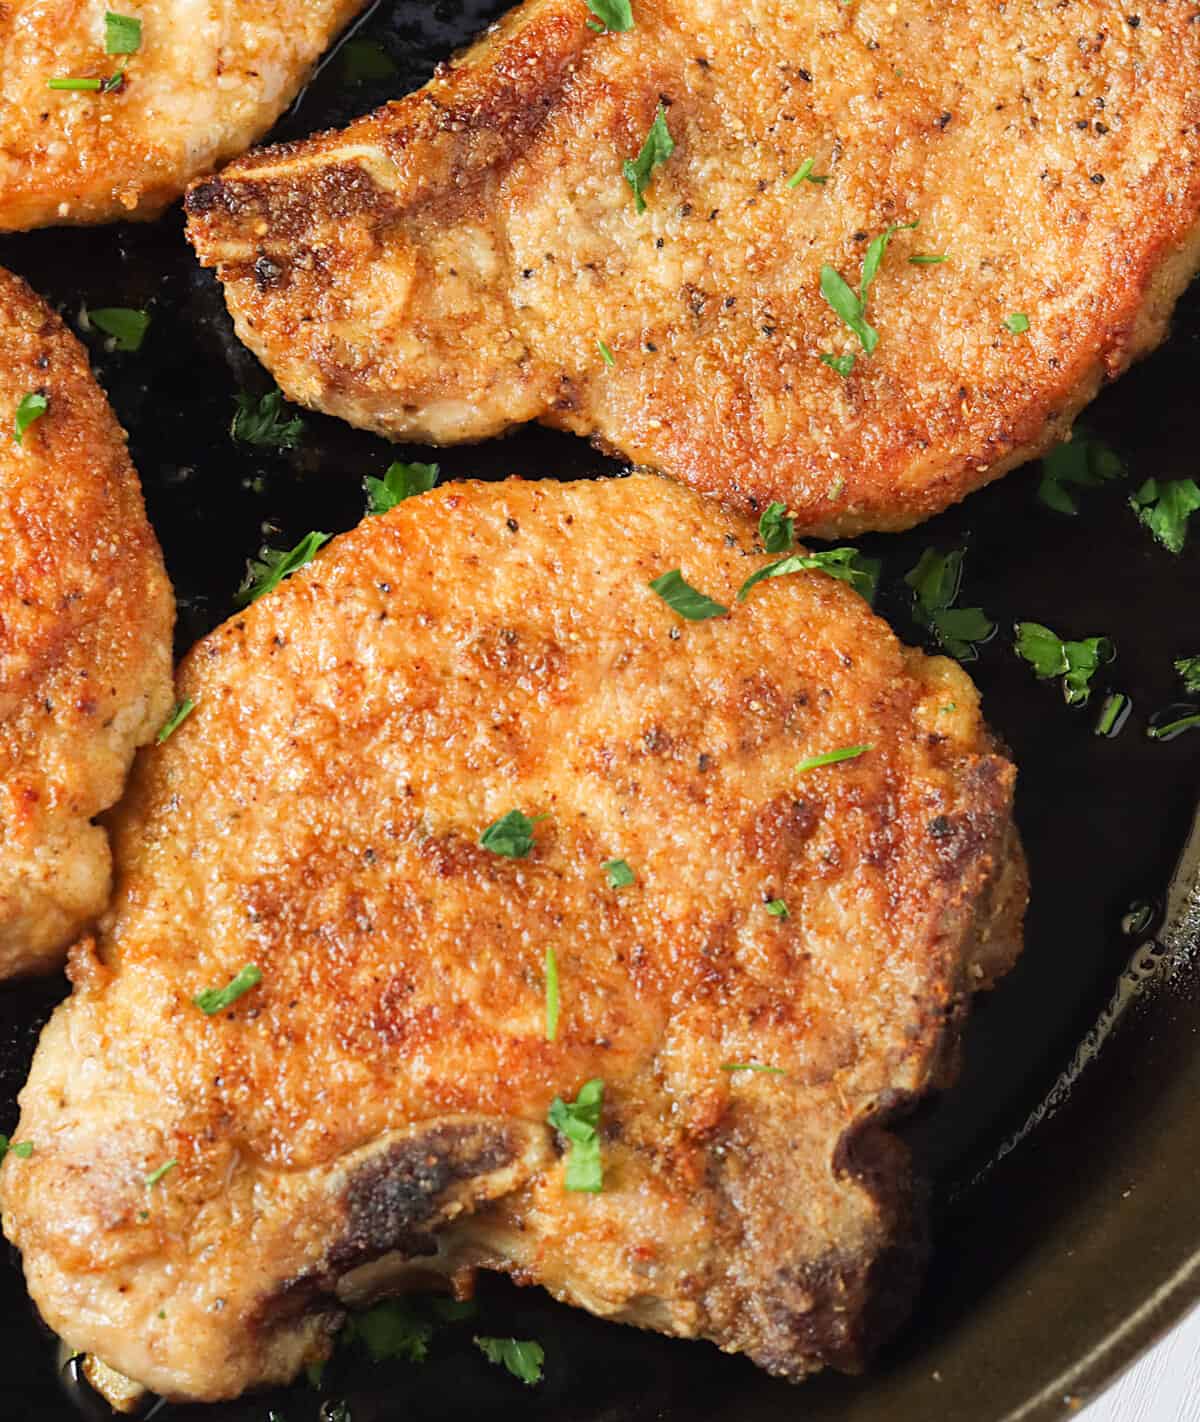 Insanely delicious fried pork chops